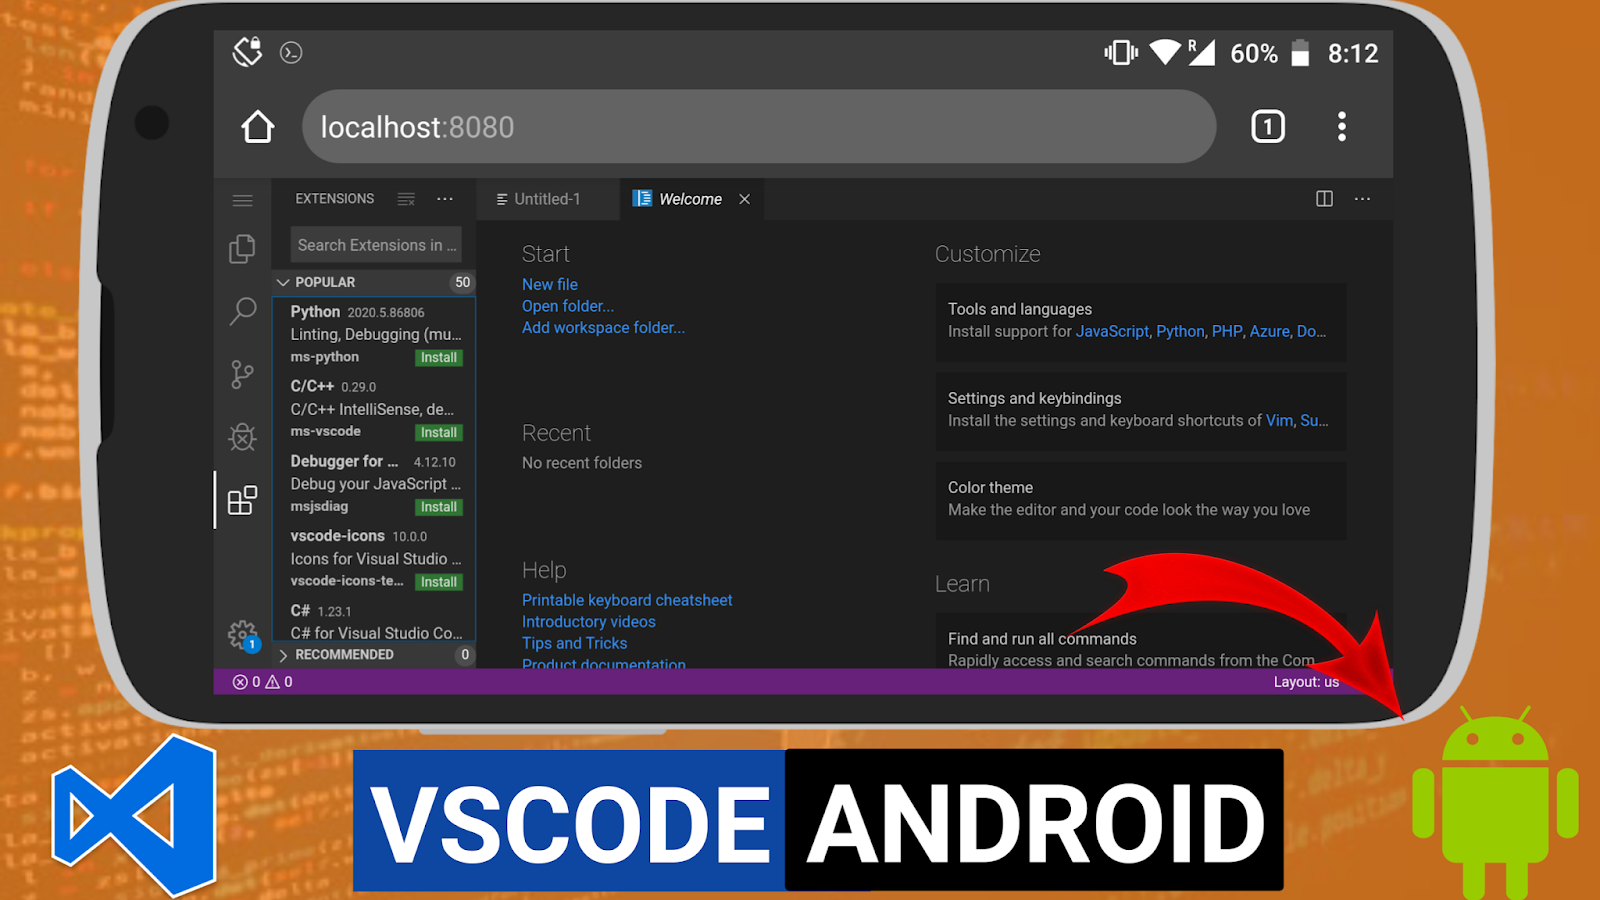 How To Install VSCODE On Android Mobile | Vscode Run Kali Linux Android  Without Root